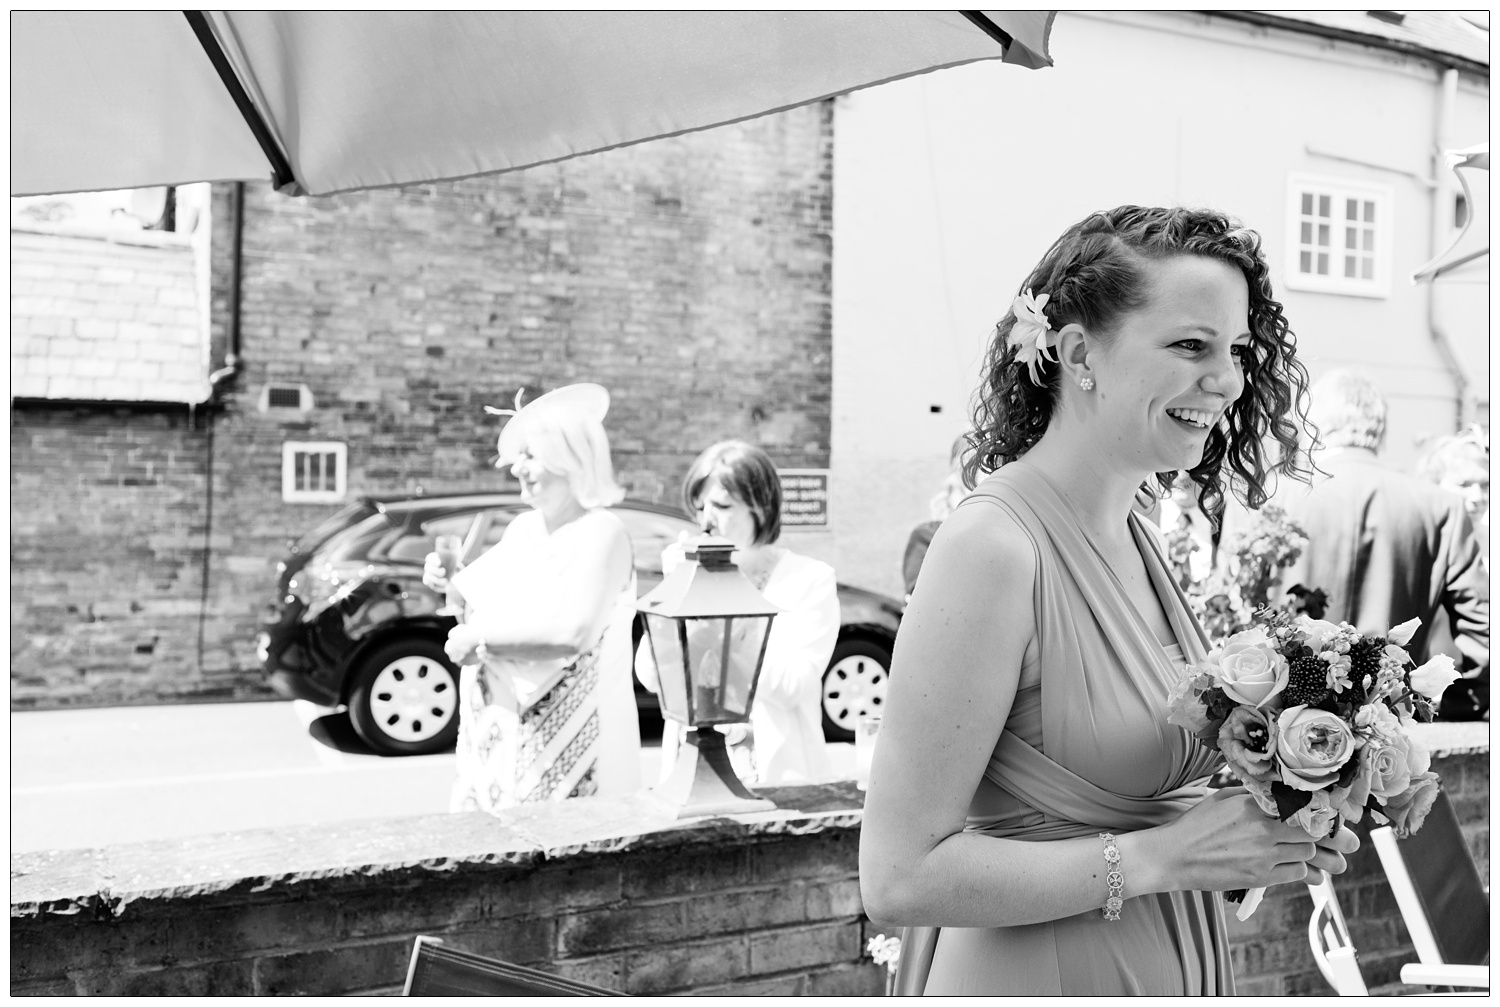 Candid black and white photograph of a bridesmaid.